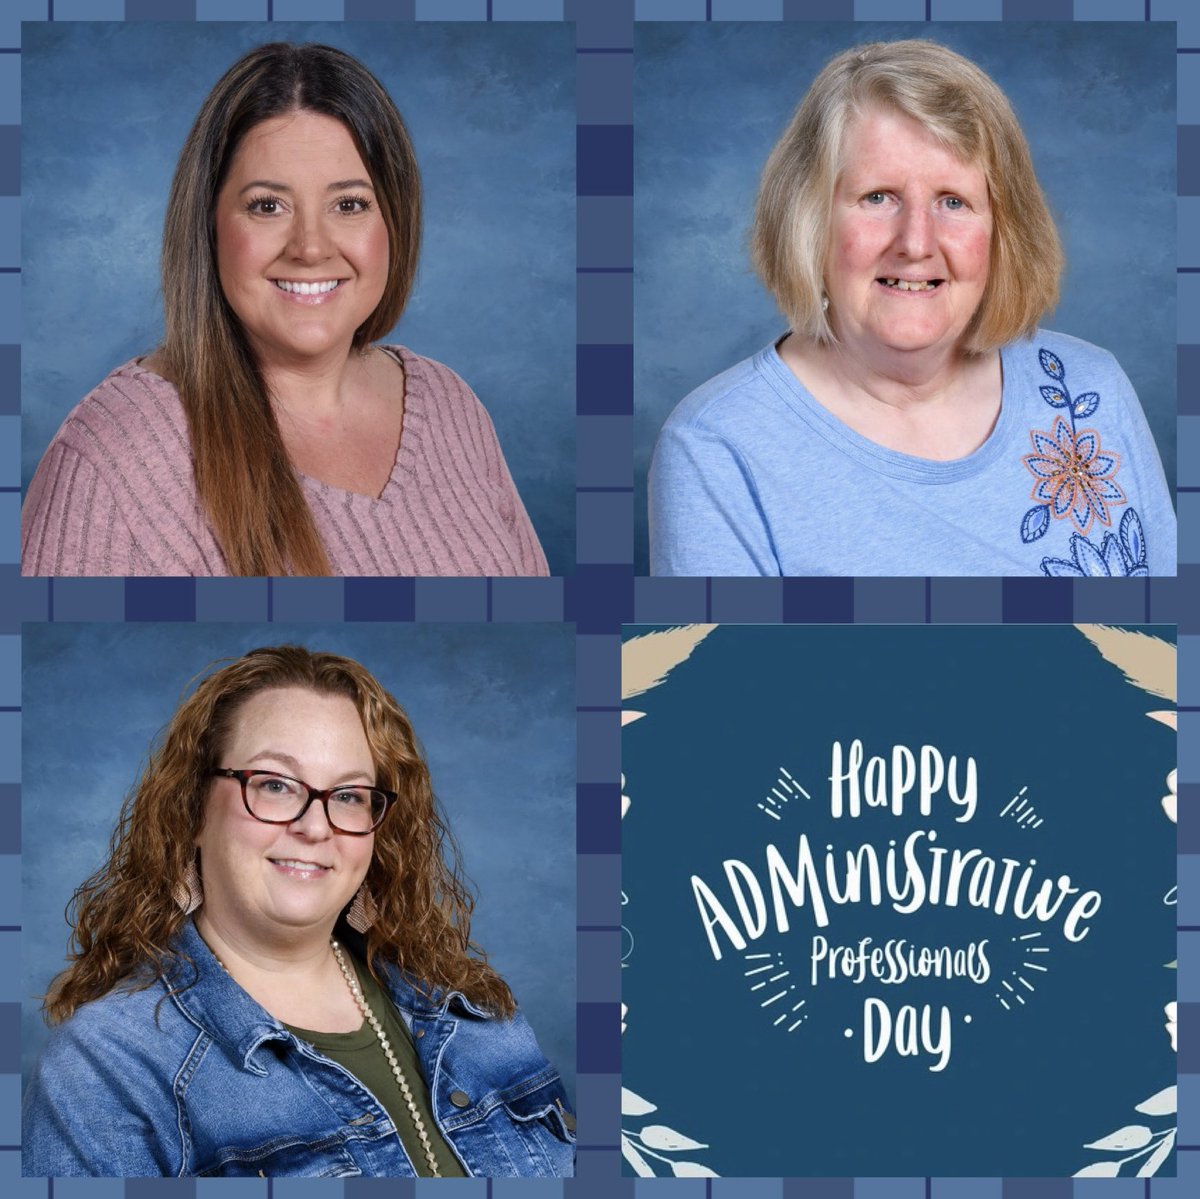 Thank you, Mrs. Terra, Mrs. Karen, and Mrs. Gamble, for ALL that you do for our school. We are so lucky to have you three ladies. Hope you have an amazing #NationalAdministrativeProfessionalsDay! ❤️❤️❤️ #eessoars